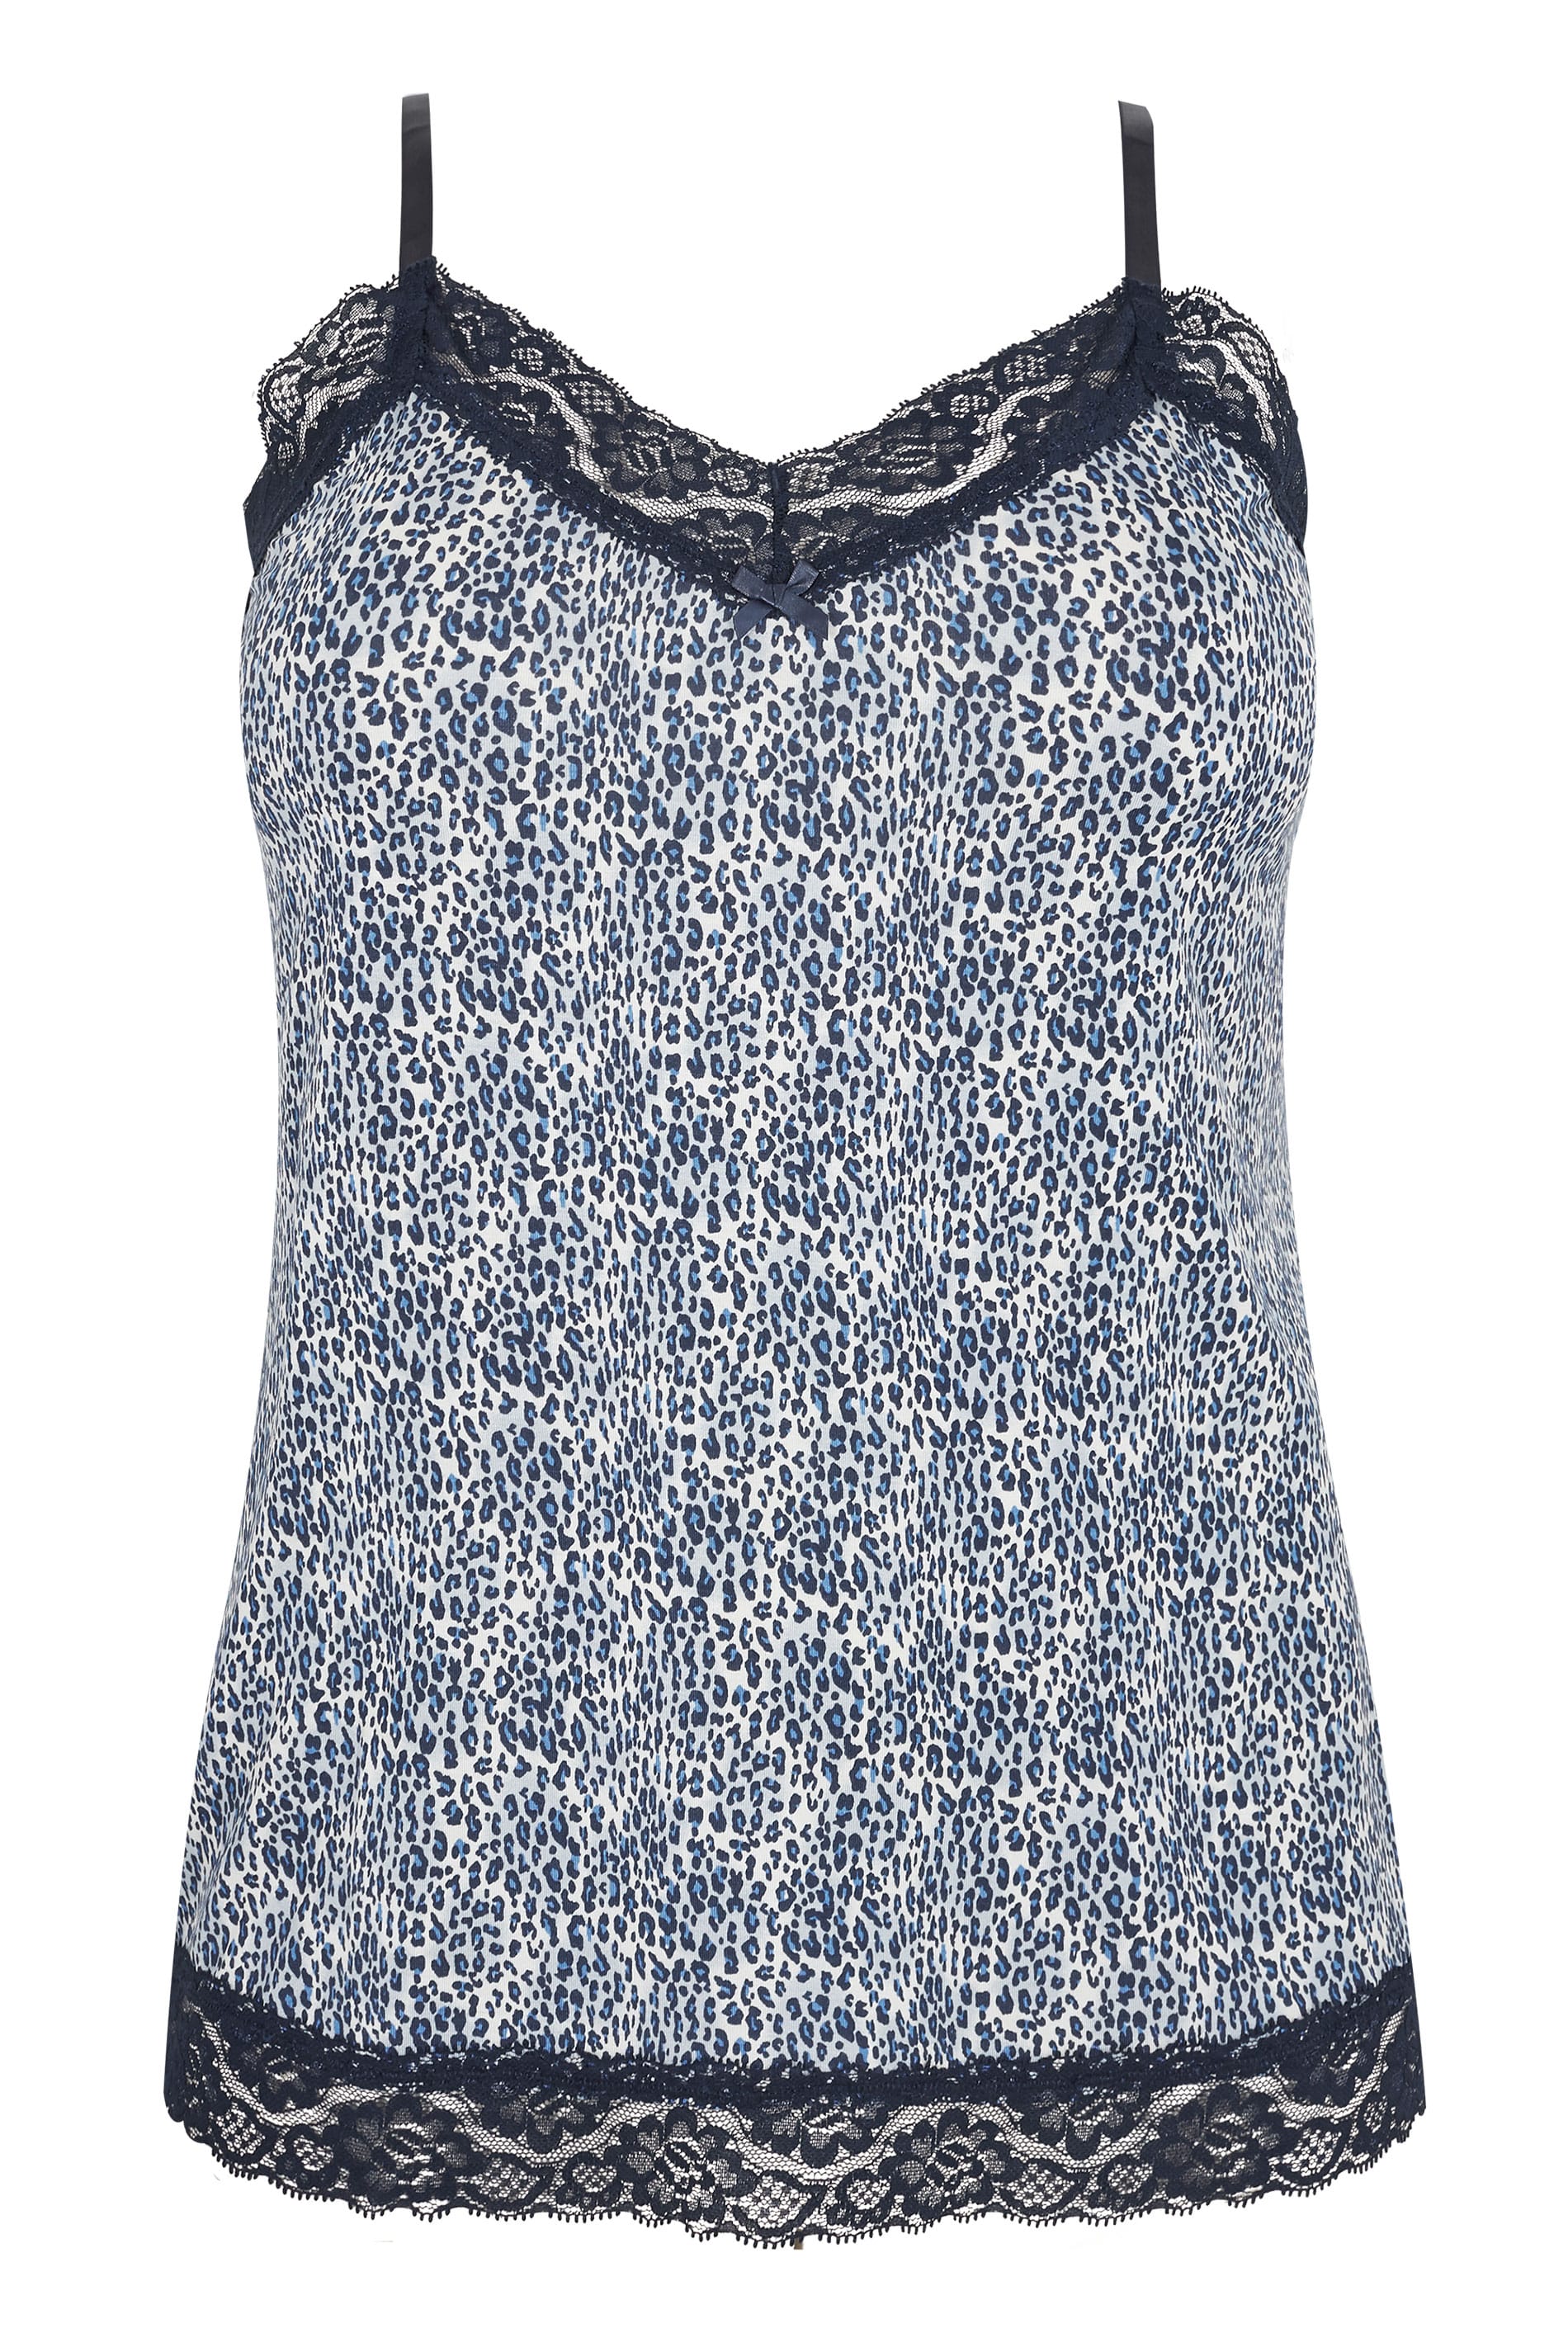 Navy Leopard Print Loungewear Cami | Plus Sizes 16 to 36 | Yours Clothing